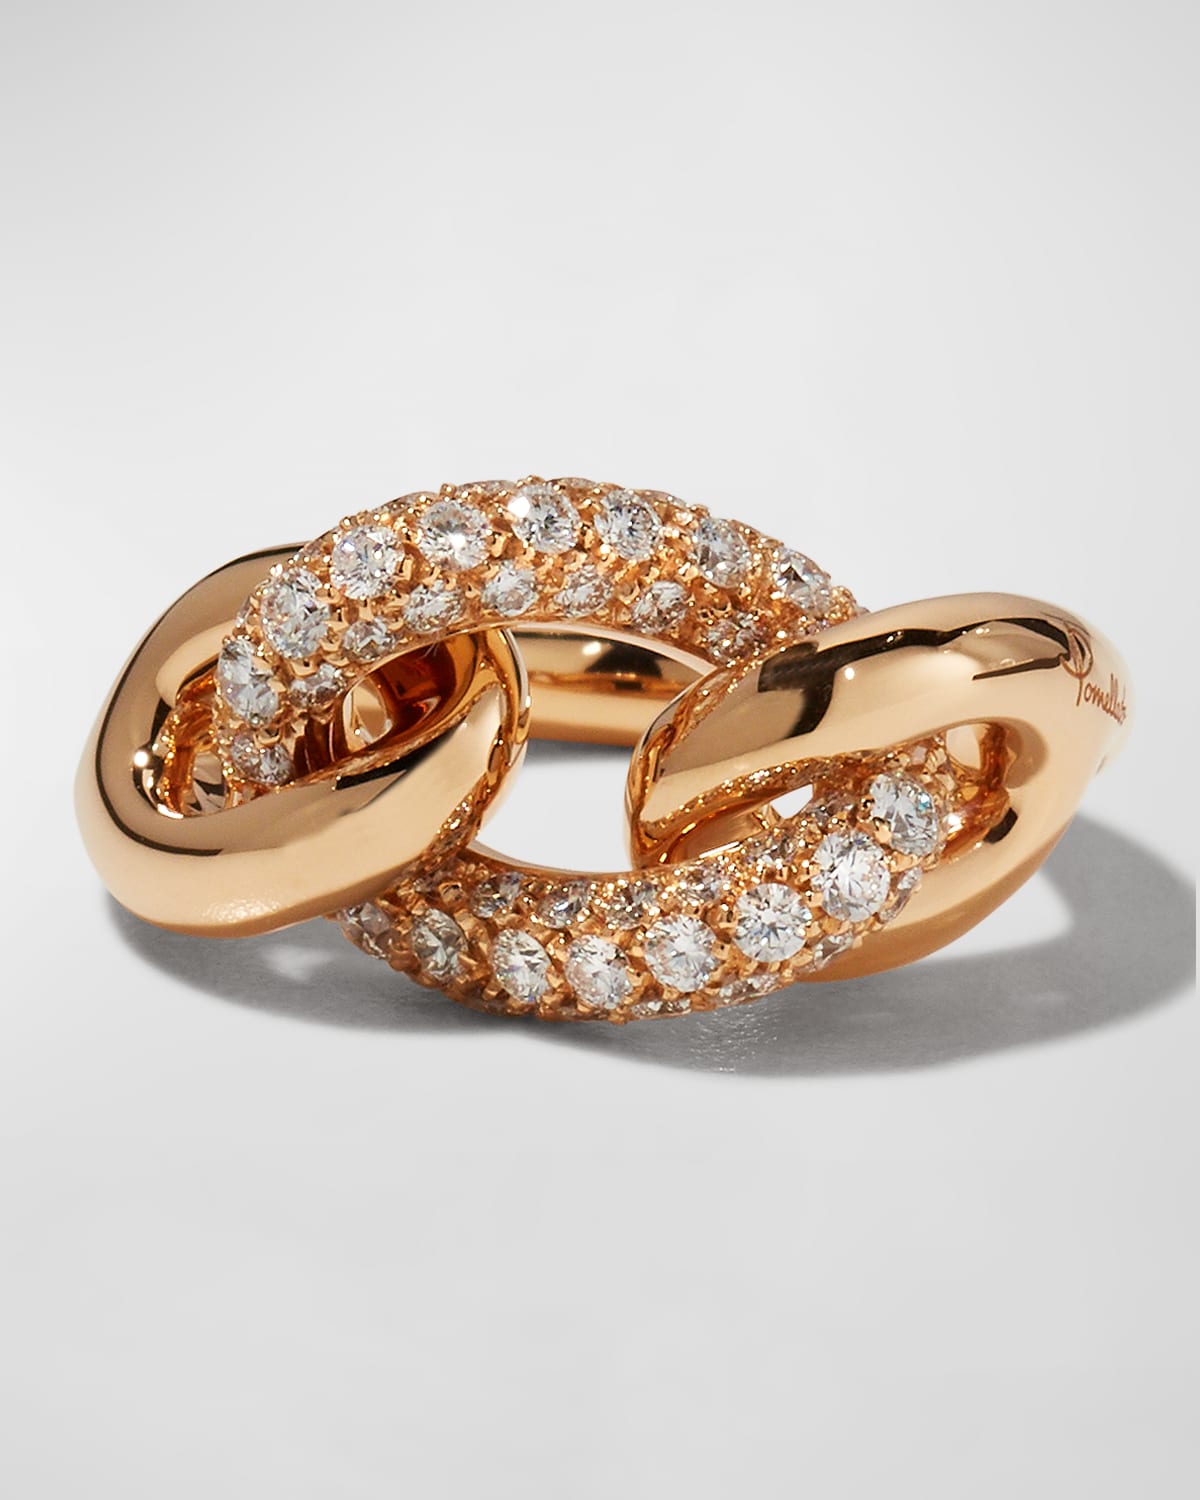 Catene Demi Pave Ring in 18K Rose Gold and Diamonds, Size 55